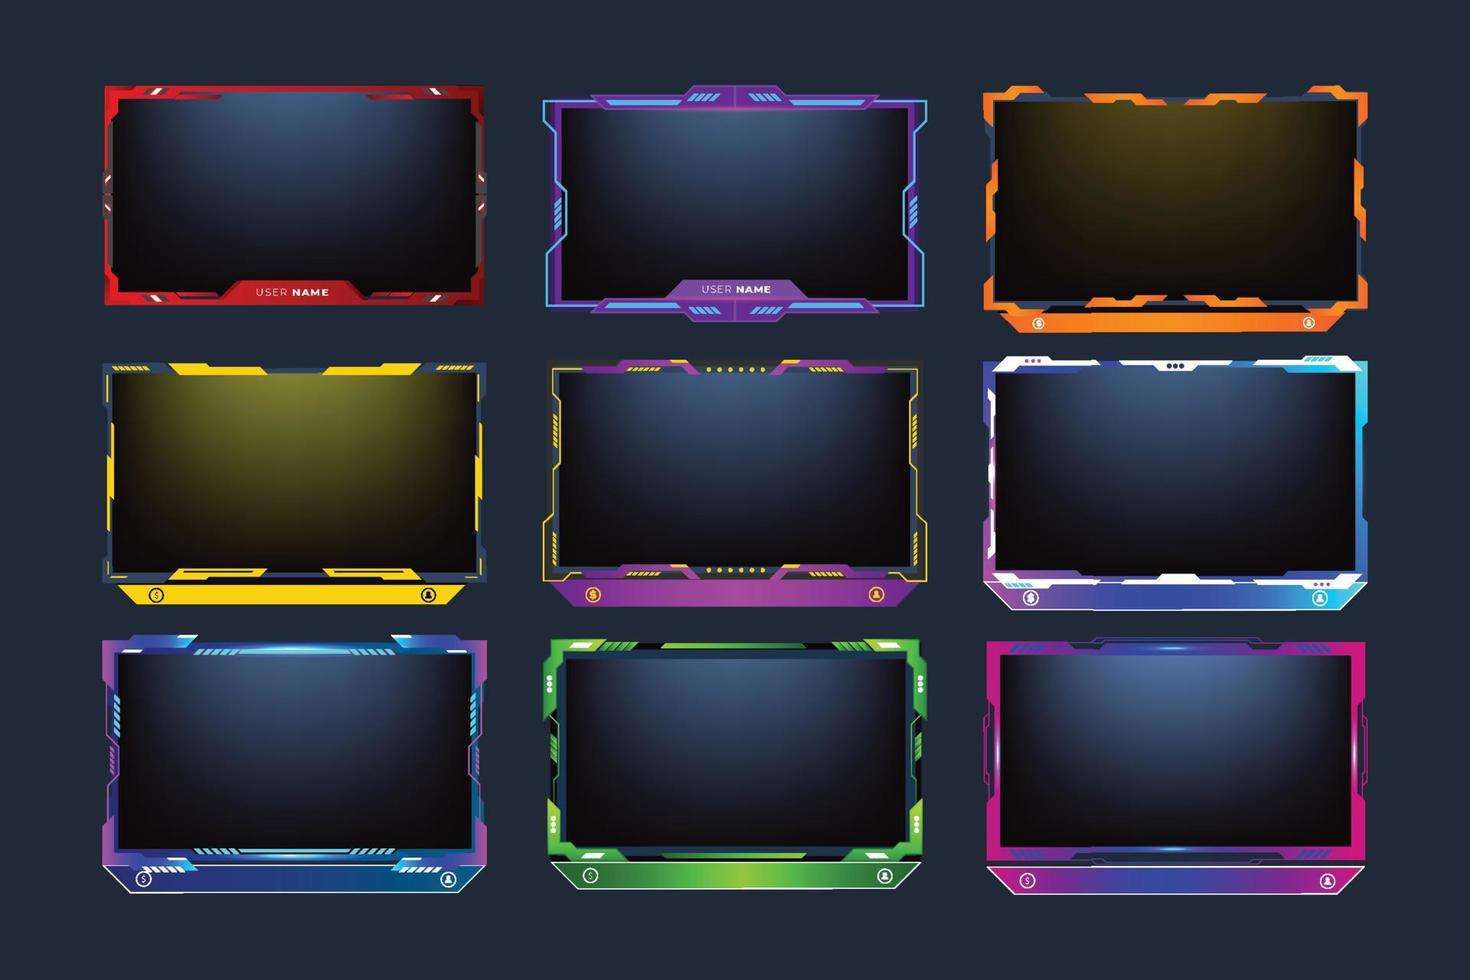 Futuristic gaming frame border bundle with purple, red, and yellow colors. Modern gaming screen panel and frame border set with neon effect. Live and streaming screen interface collection for gamers. vector